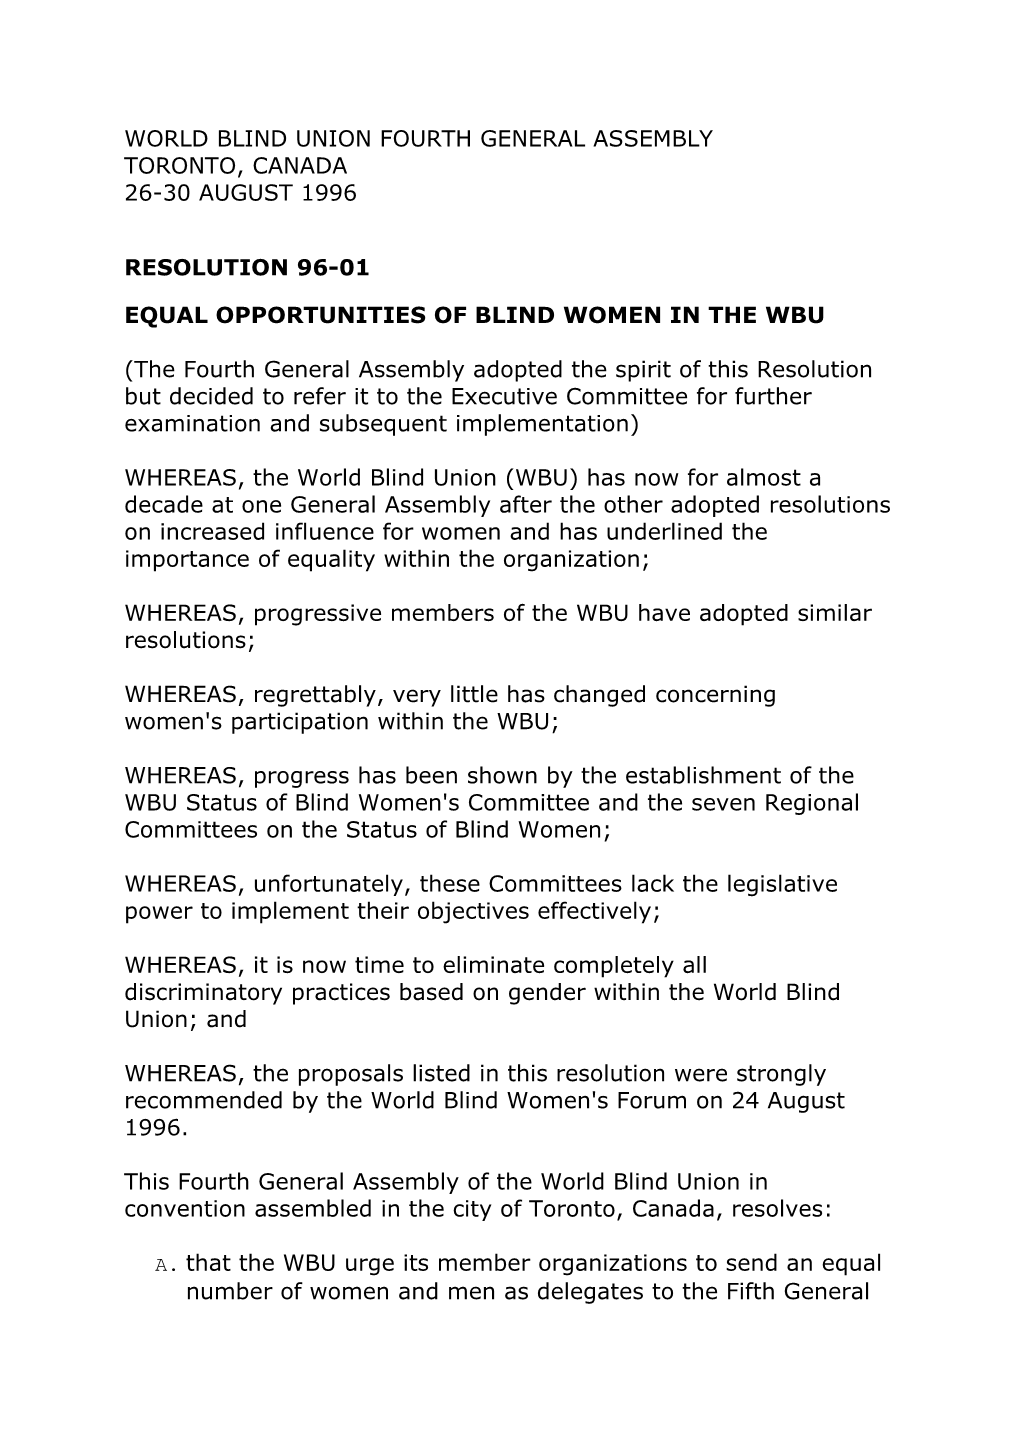 World Blind Union Fourth General Assembly